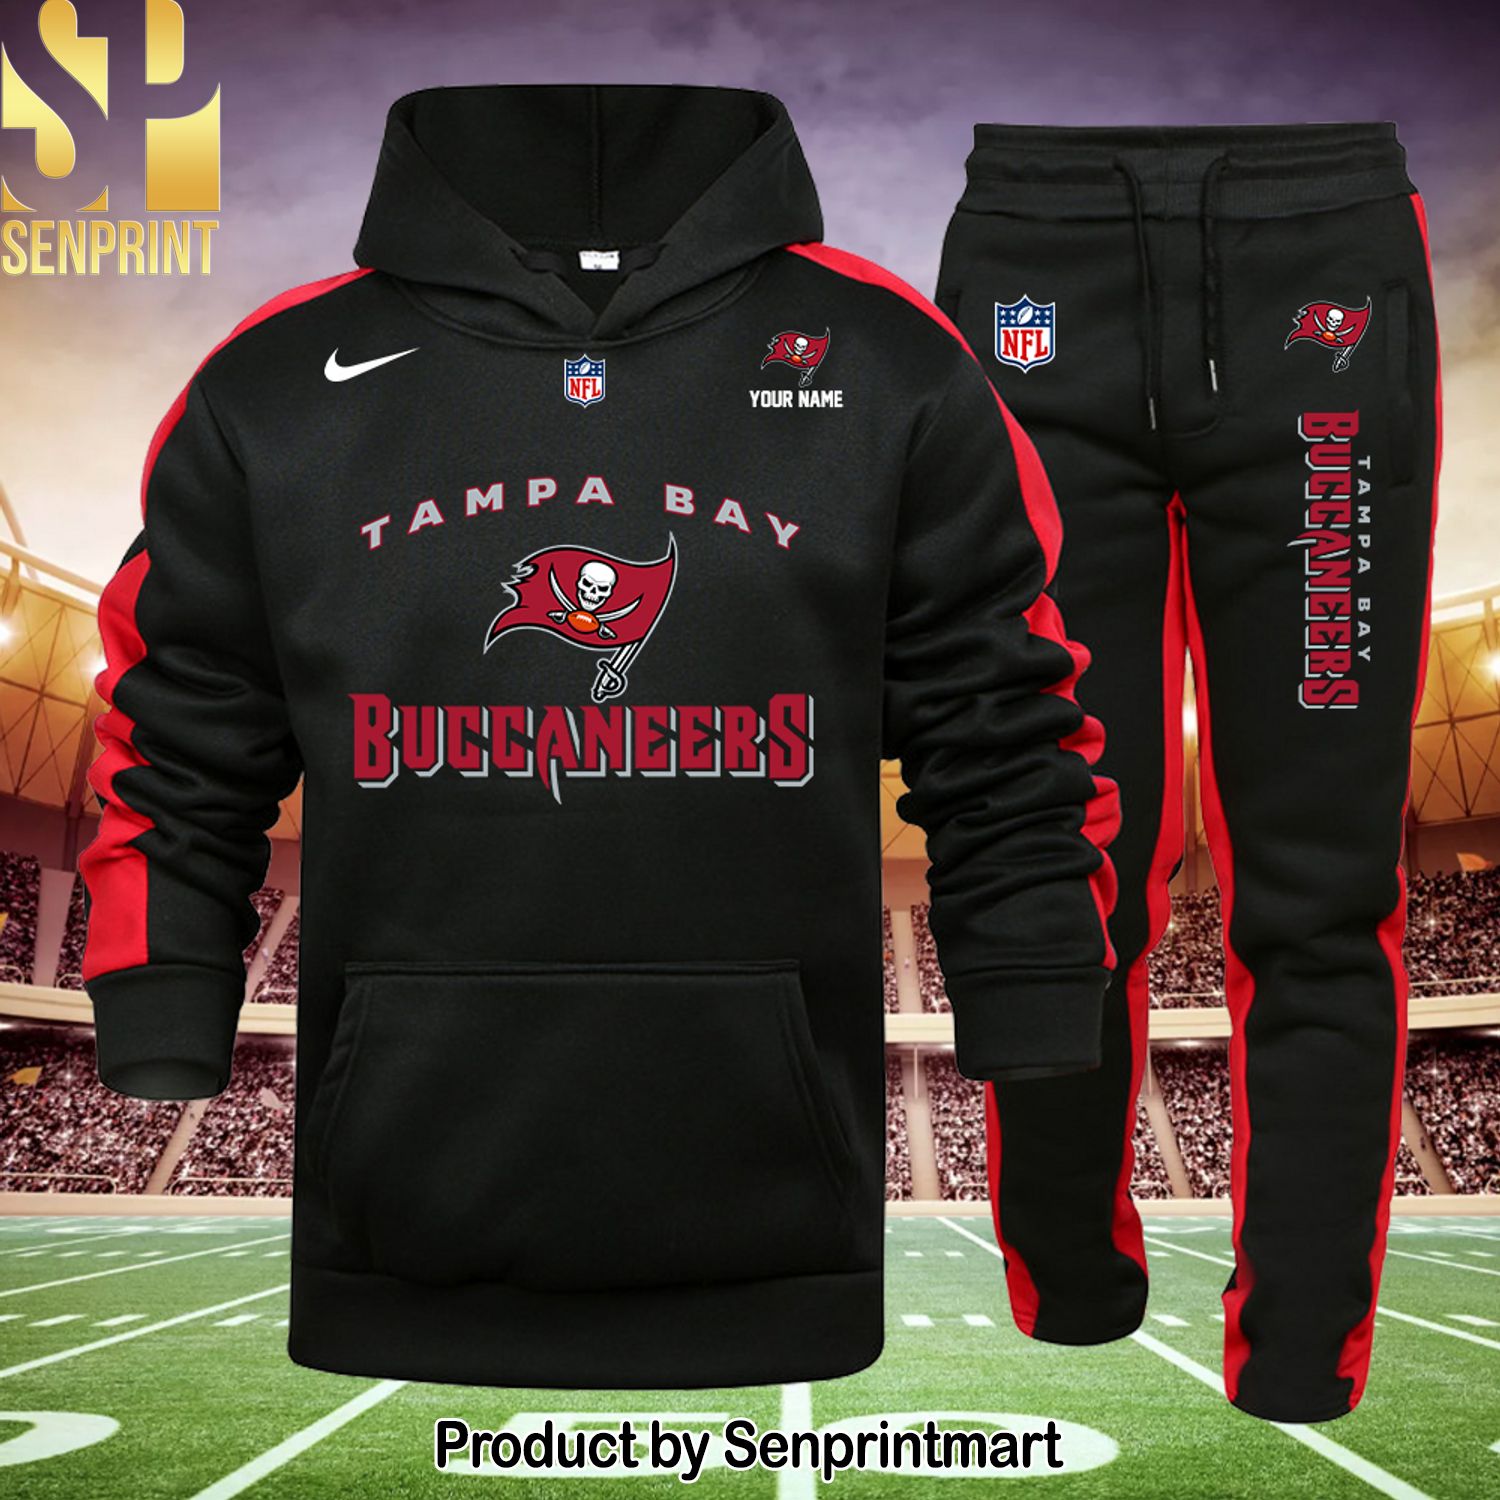 NFL Tampa Bay Buccaneers Cool Style Shirt and Sweatpants